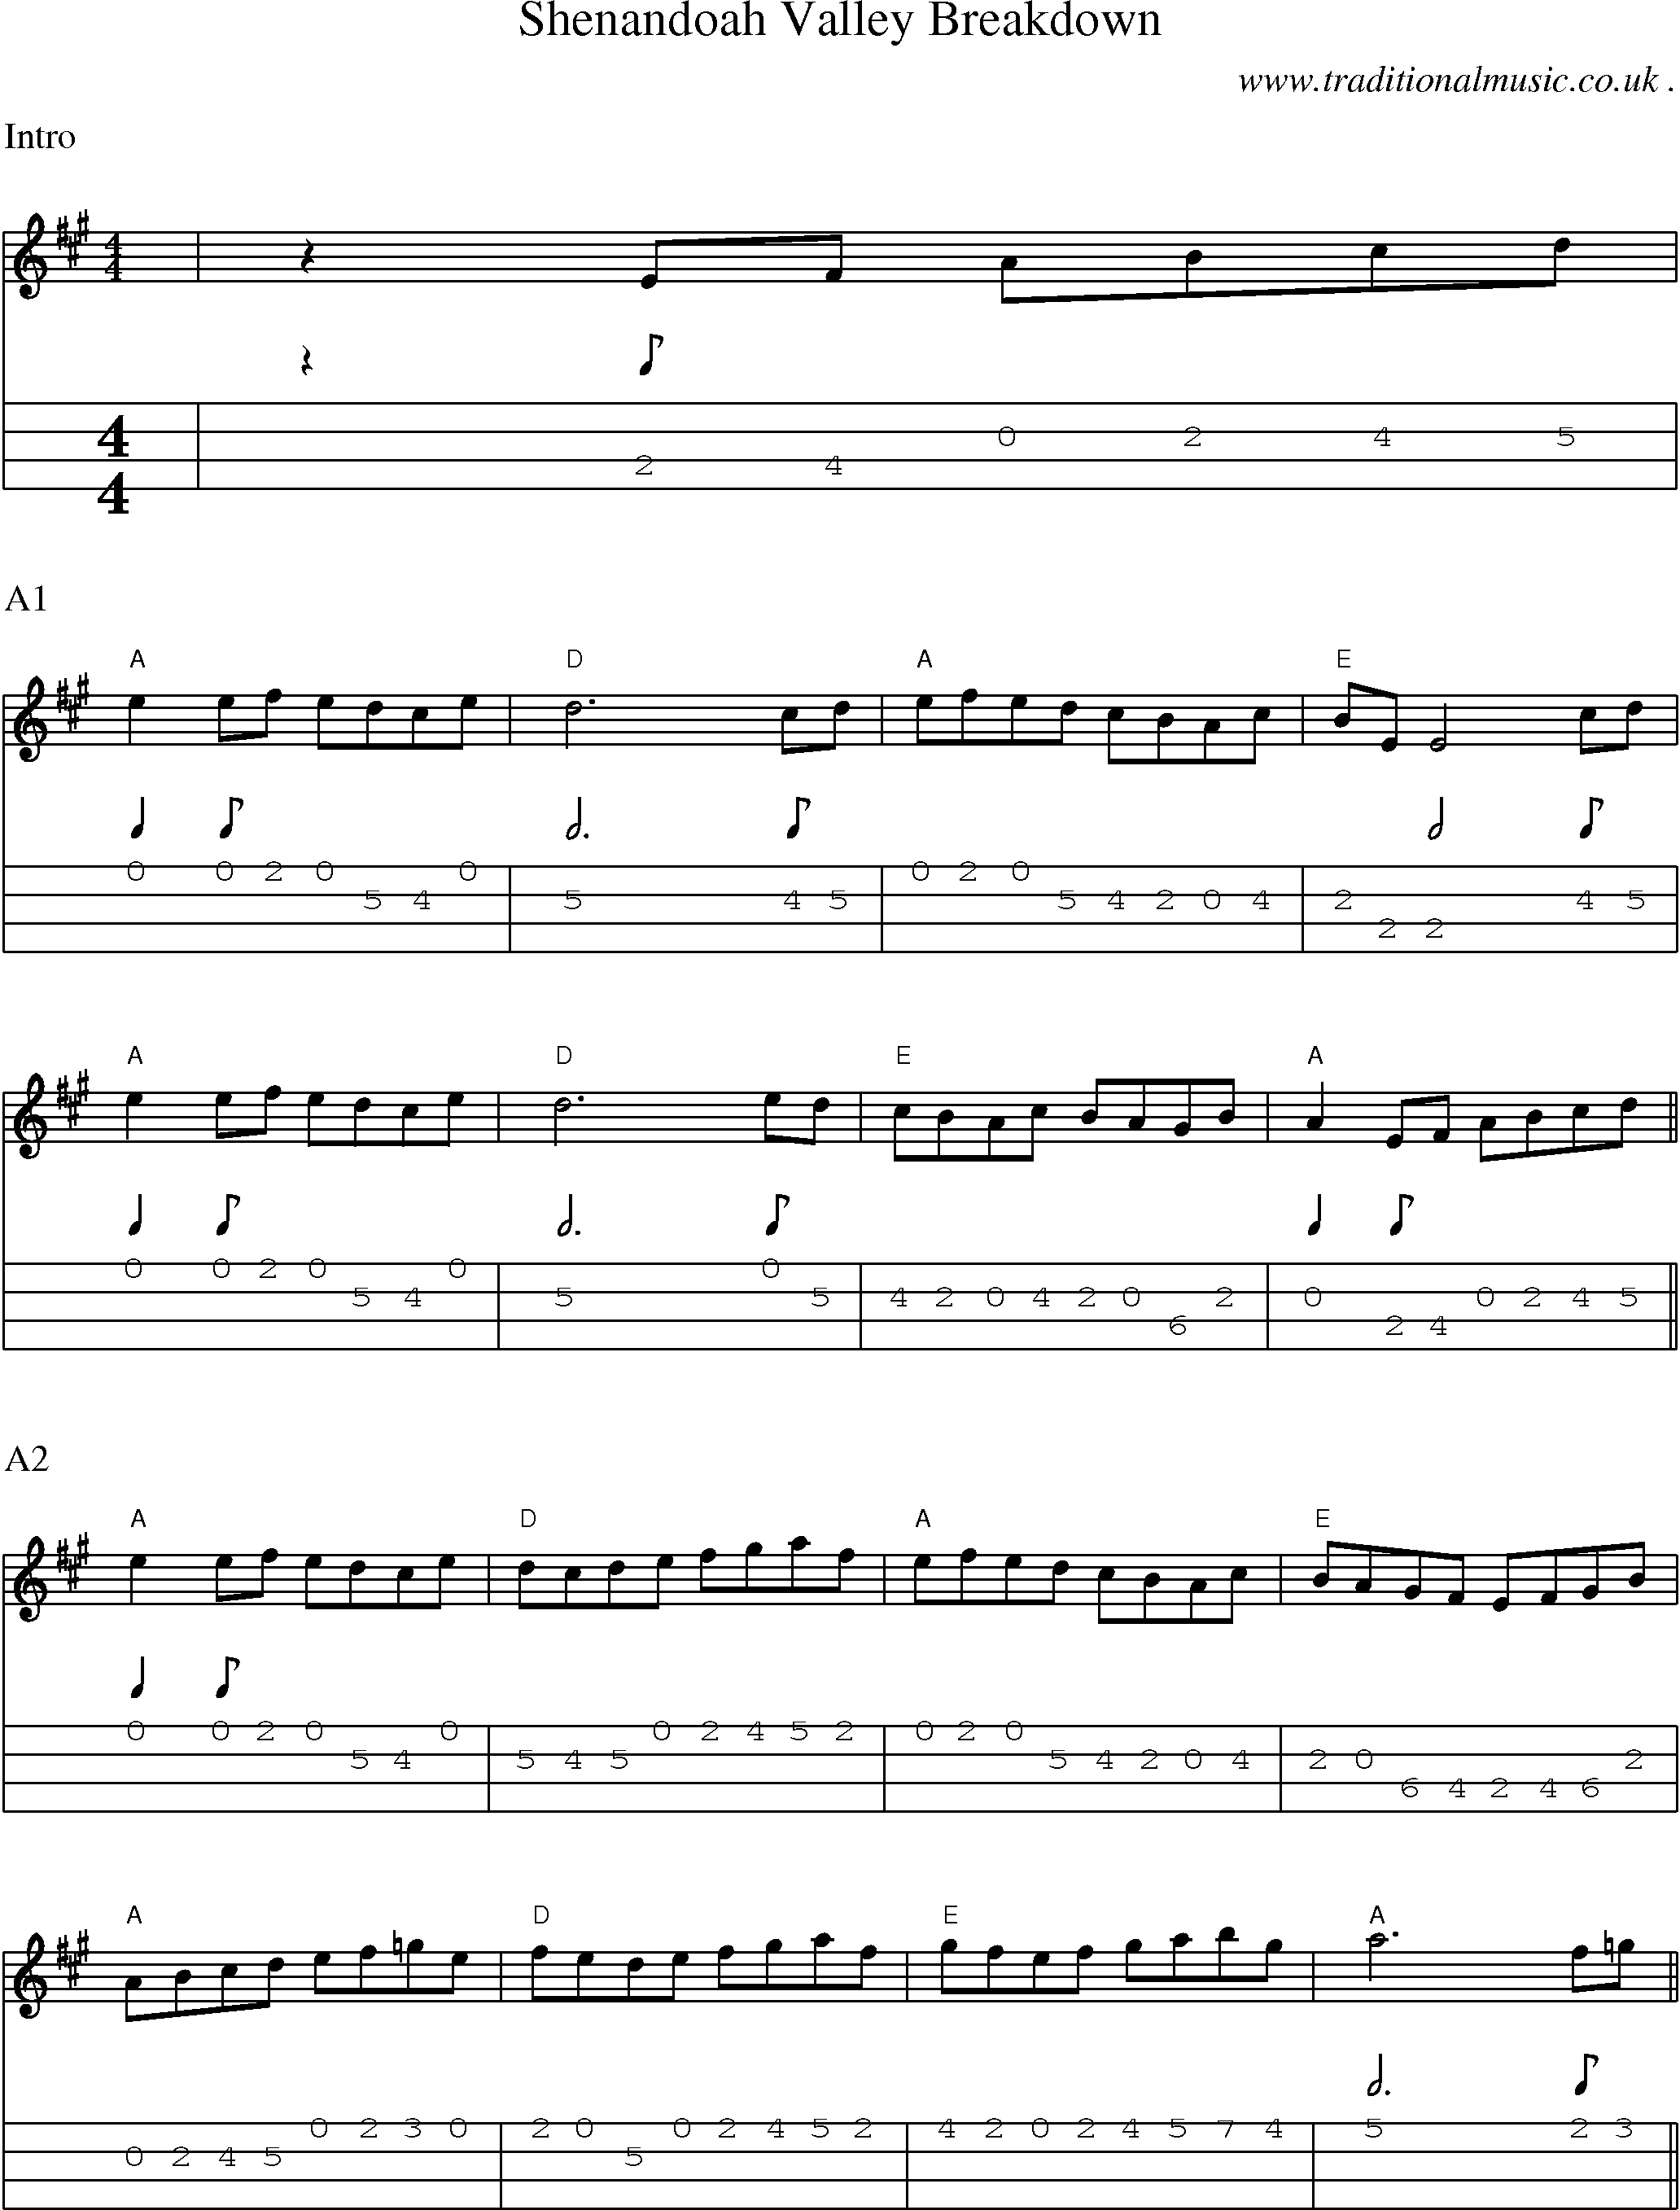 Music Score and Guitar Tabs for Shenandoah Valley Breakdown